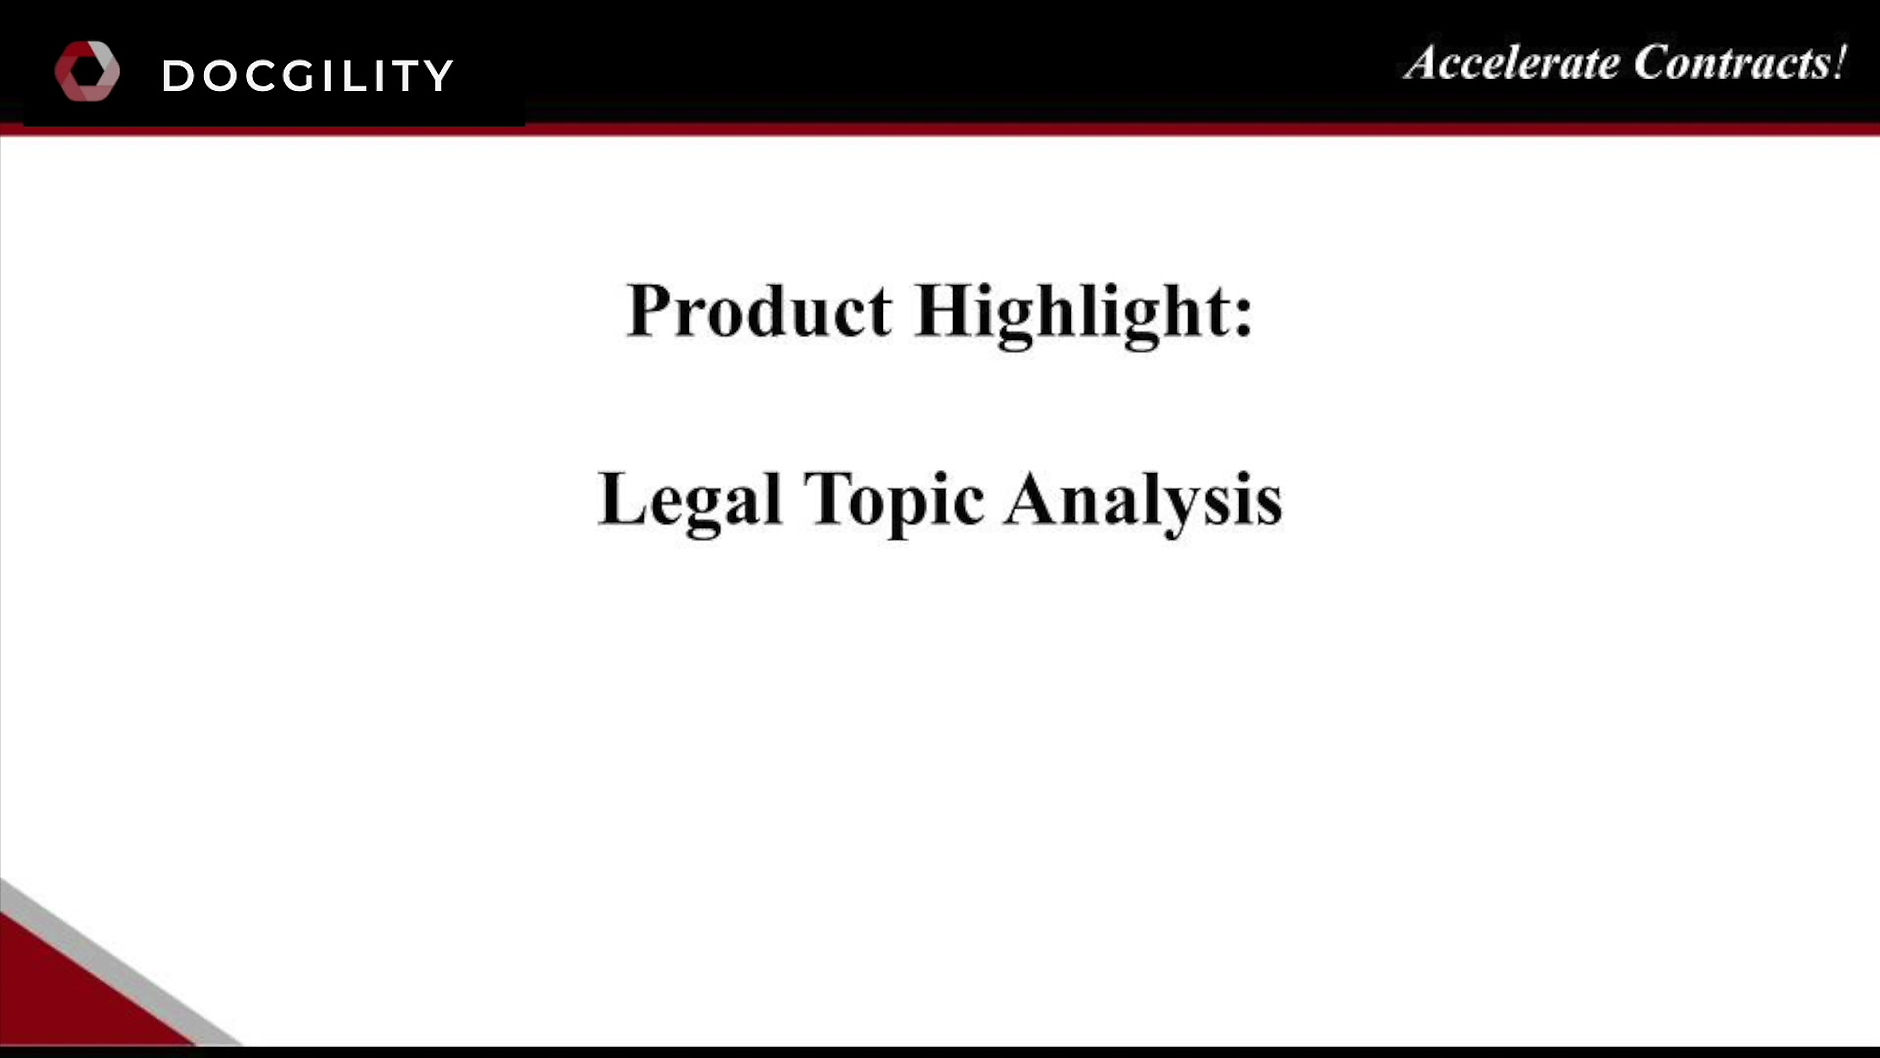 Highlight 1 - Legal Topic Analysis